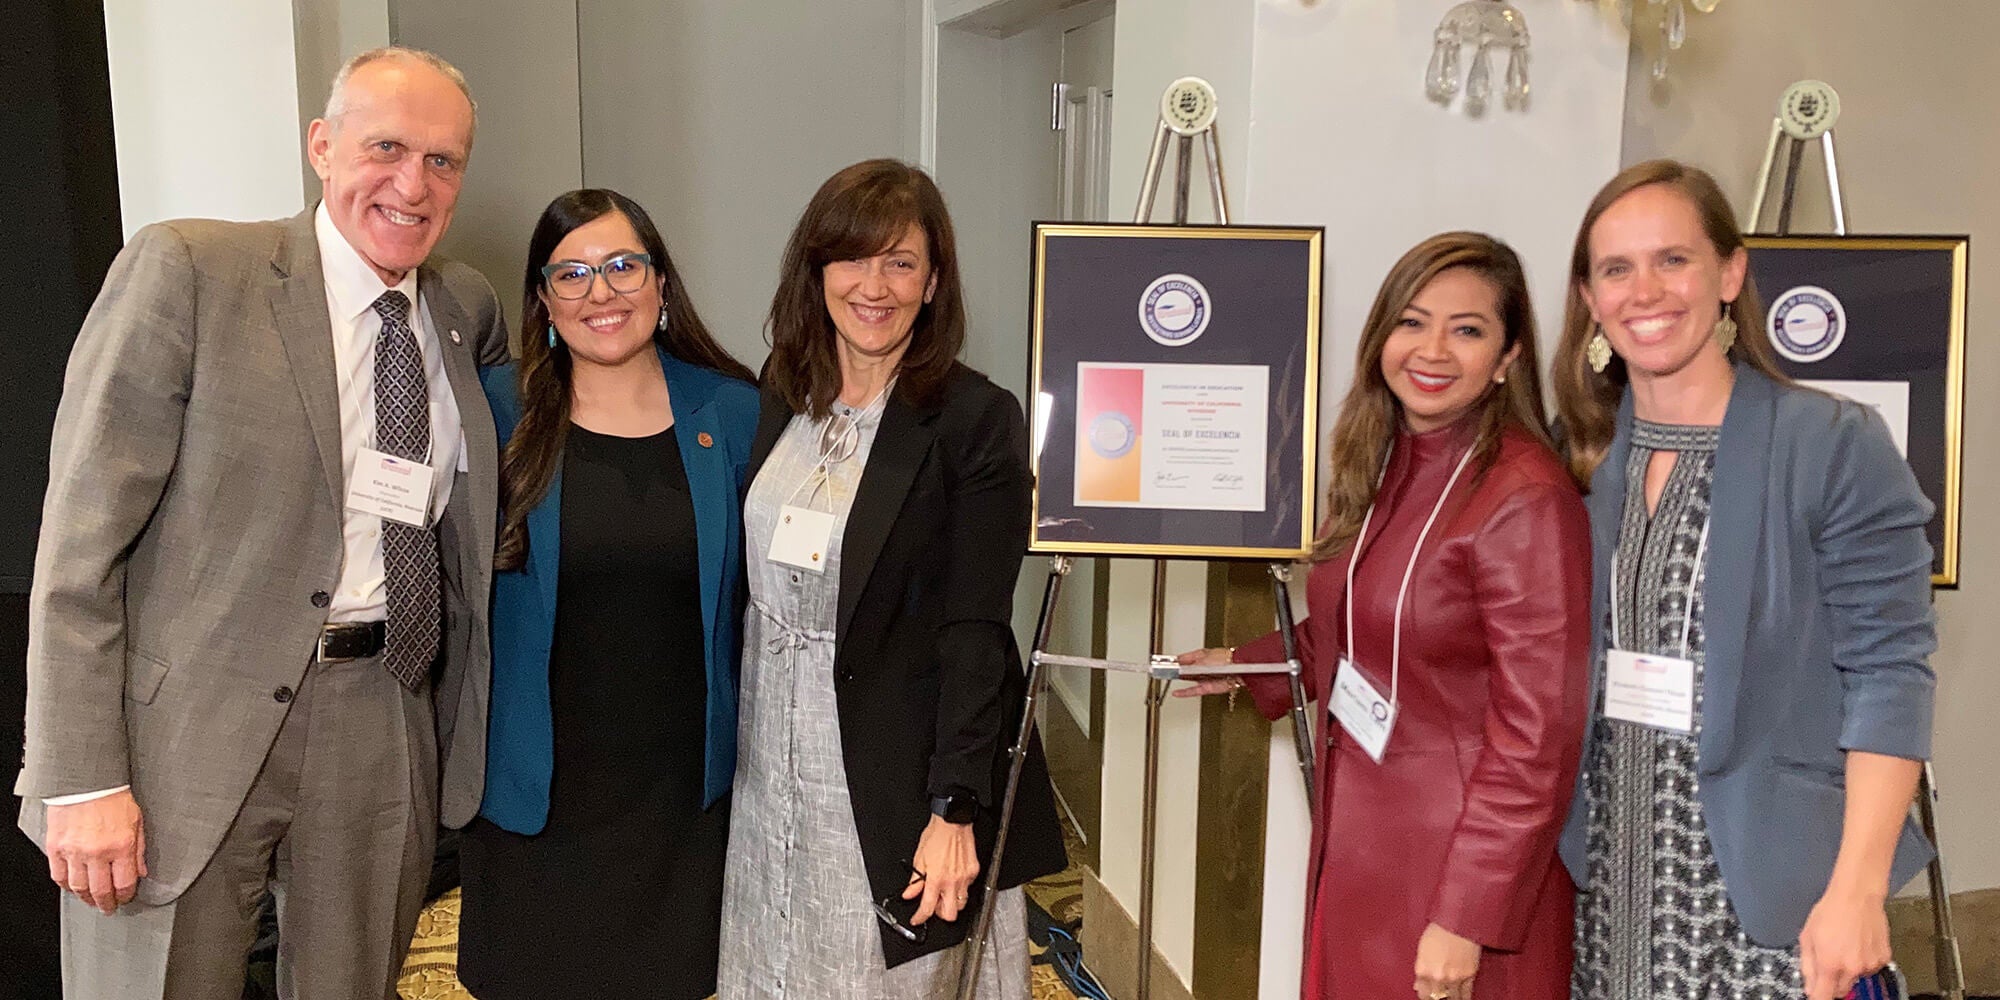 (From left) UCR staff including Chancellor Kim A. Wilcox and Arlene Cano Matute at an event in Washington D.C. to receive the Seal of Excelencia in October 2021. (Photo courtesy of Cano Matute)